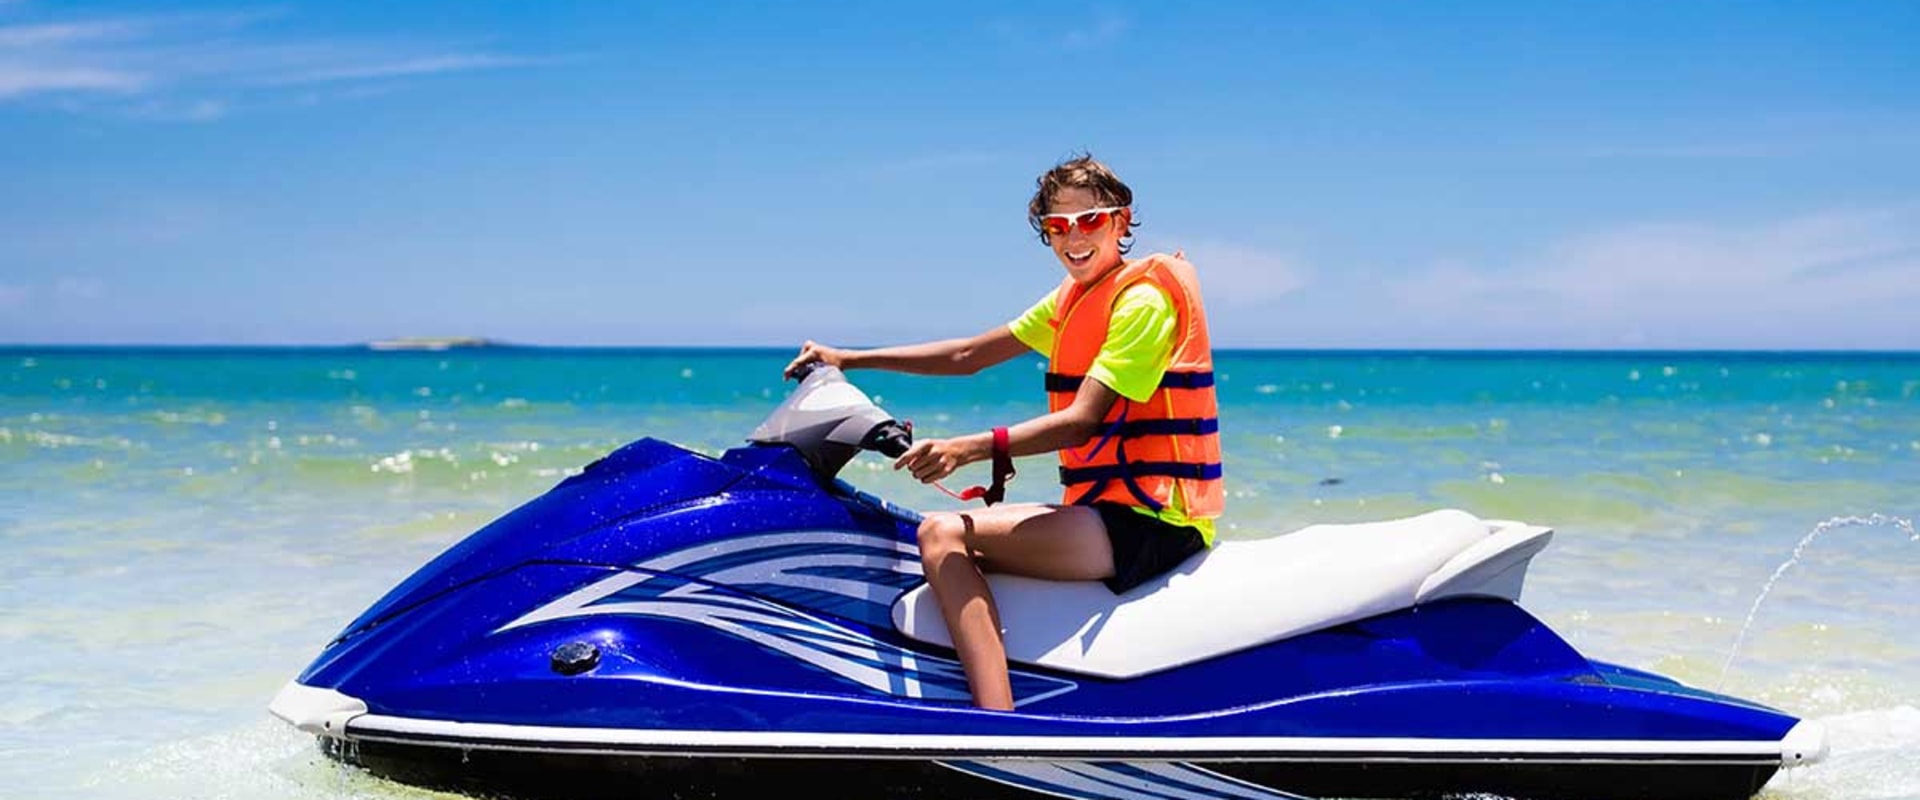 What do you need to drive a jet ski in ny?